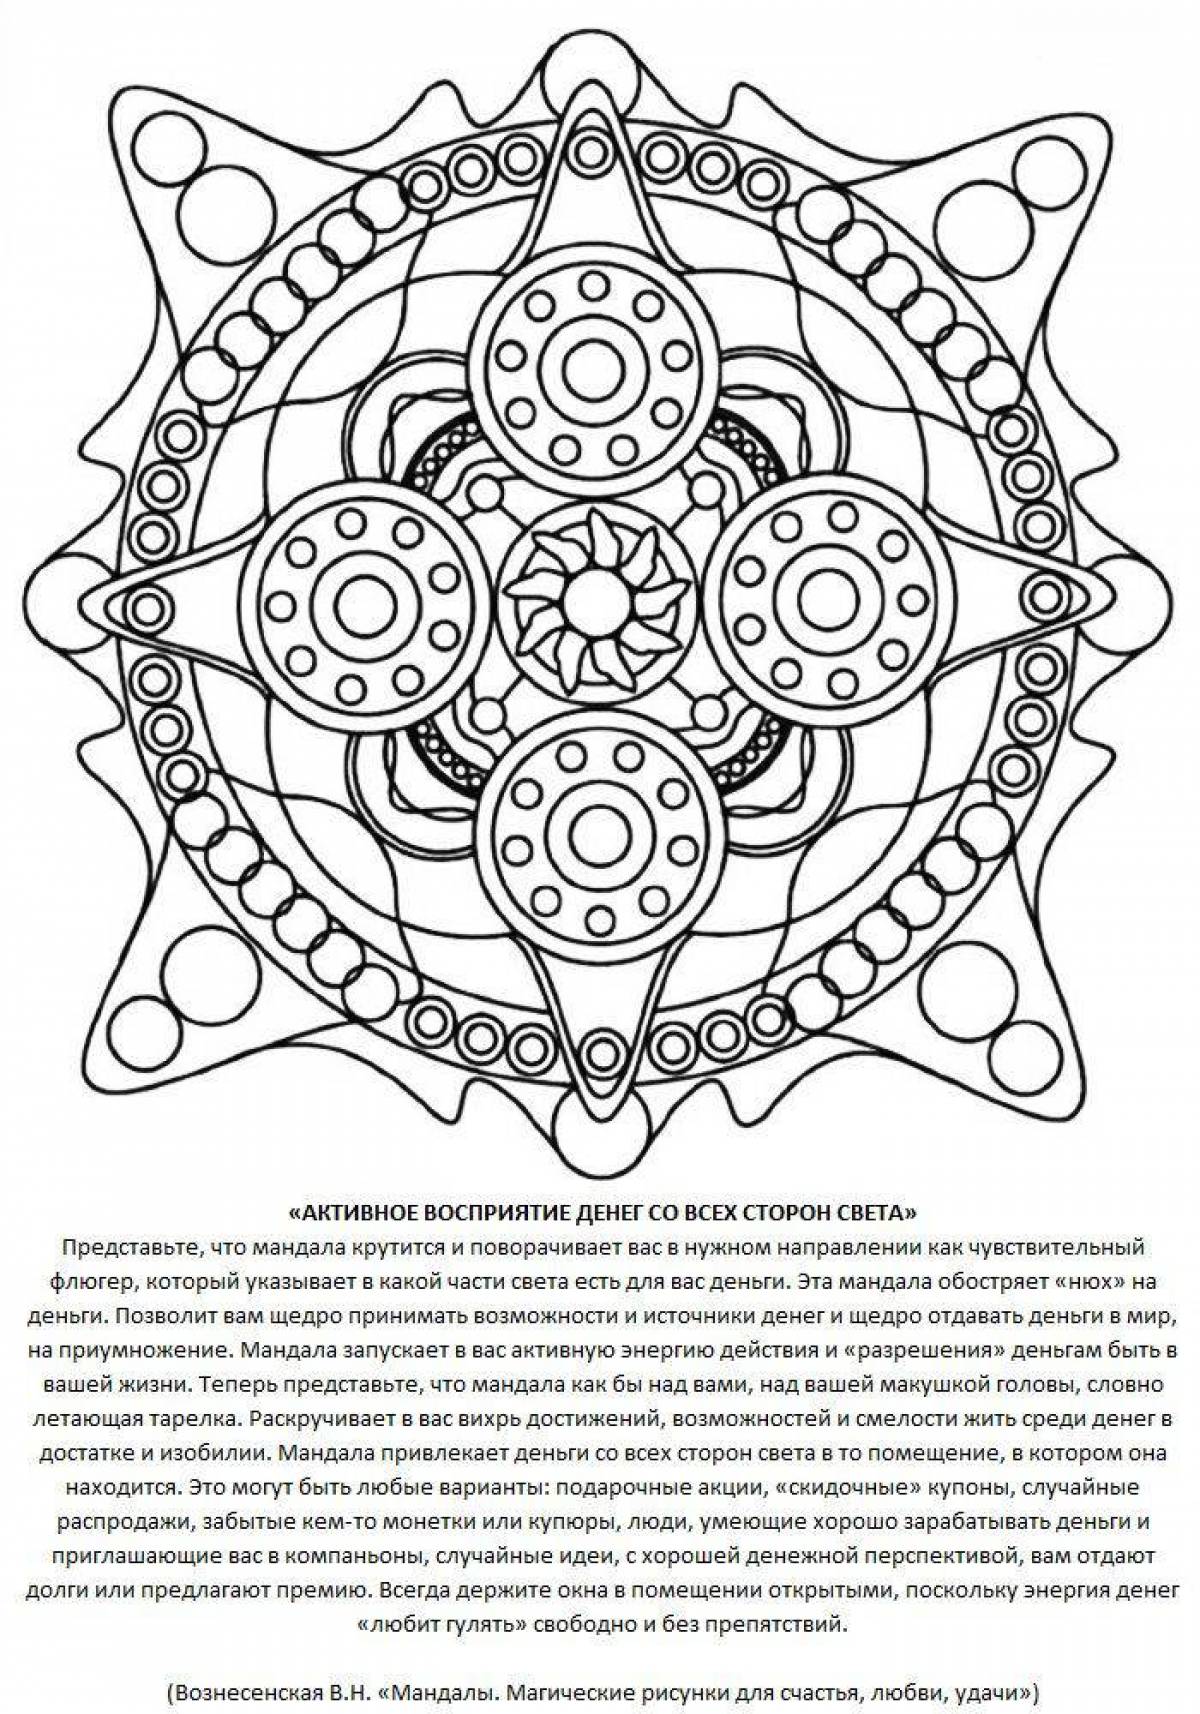 Luxurious mandala coloring pages with meaning